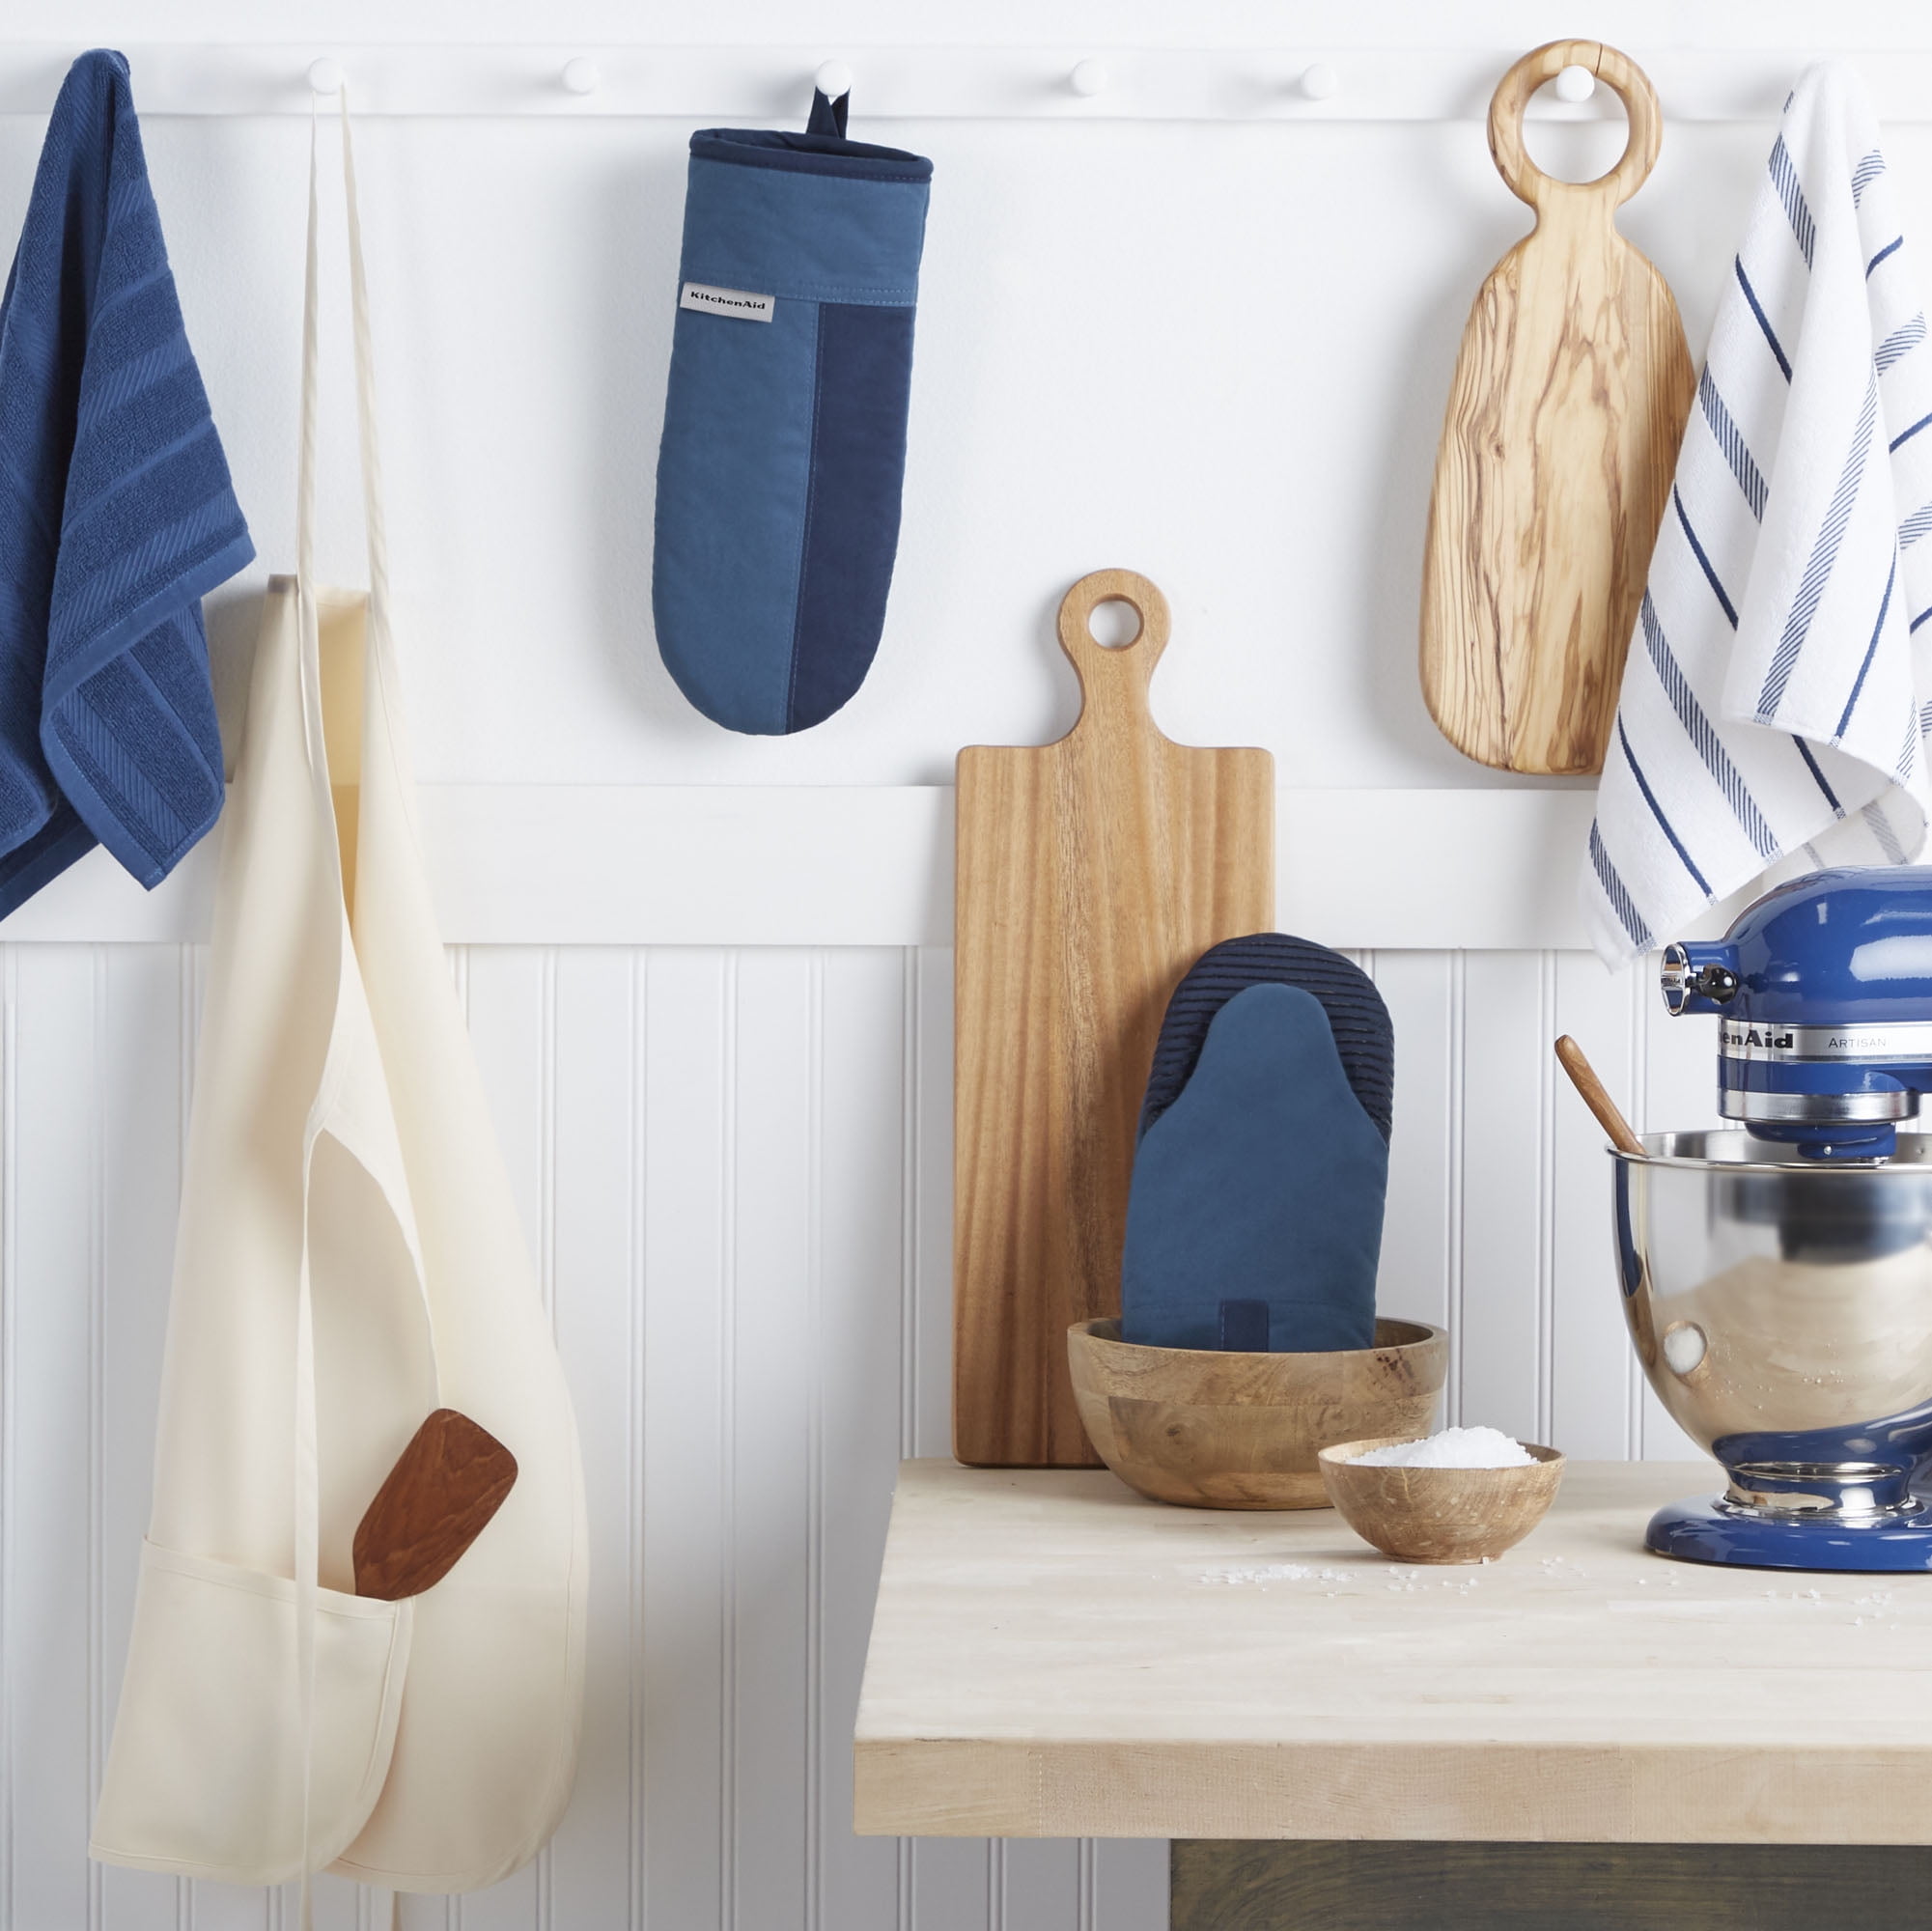 KitchenAid's Oven Mitts Are So 'Perfect,' Shoppers Are Buying